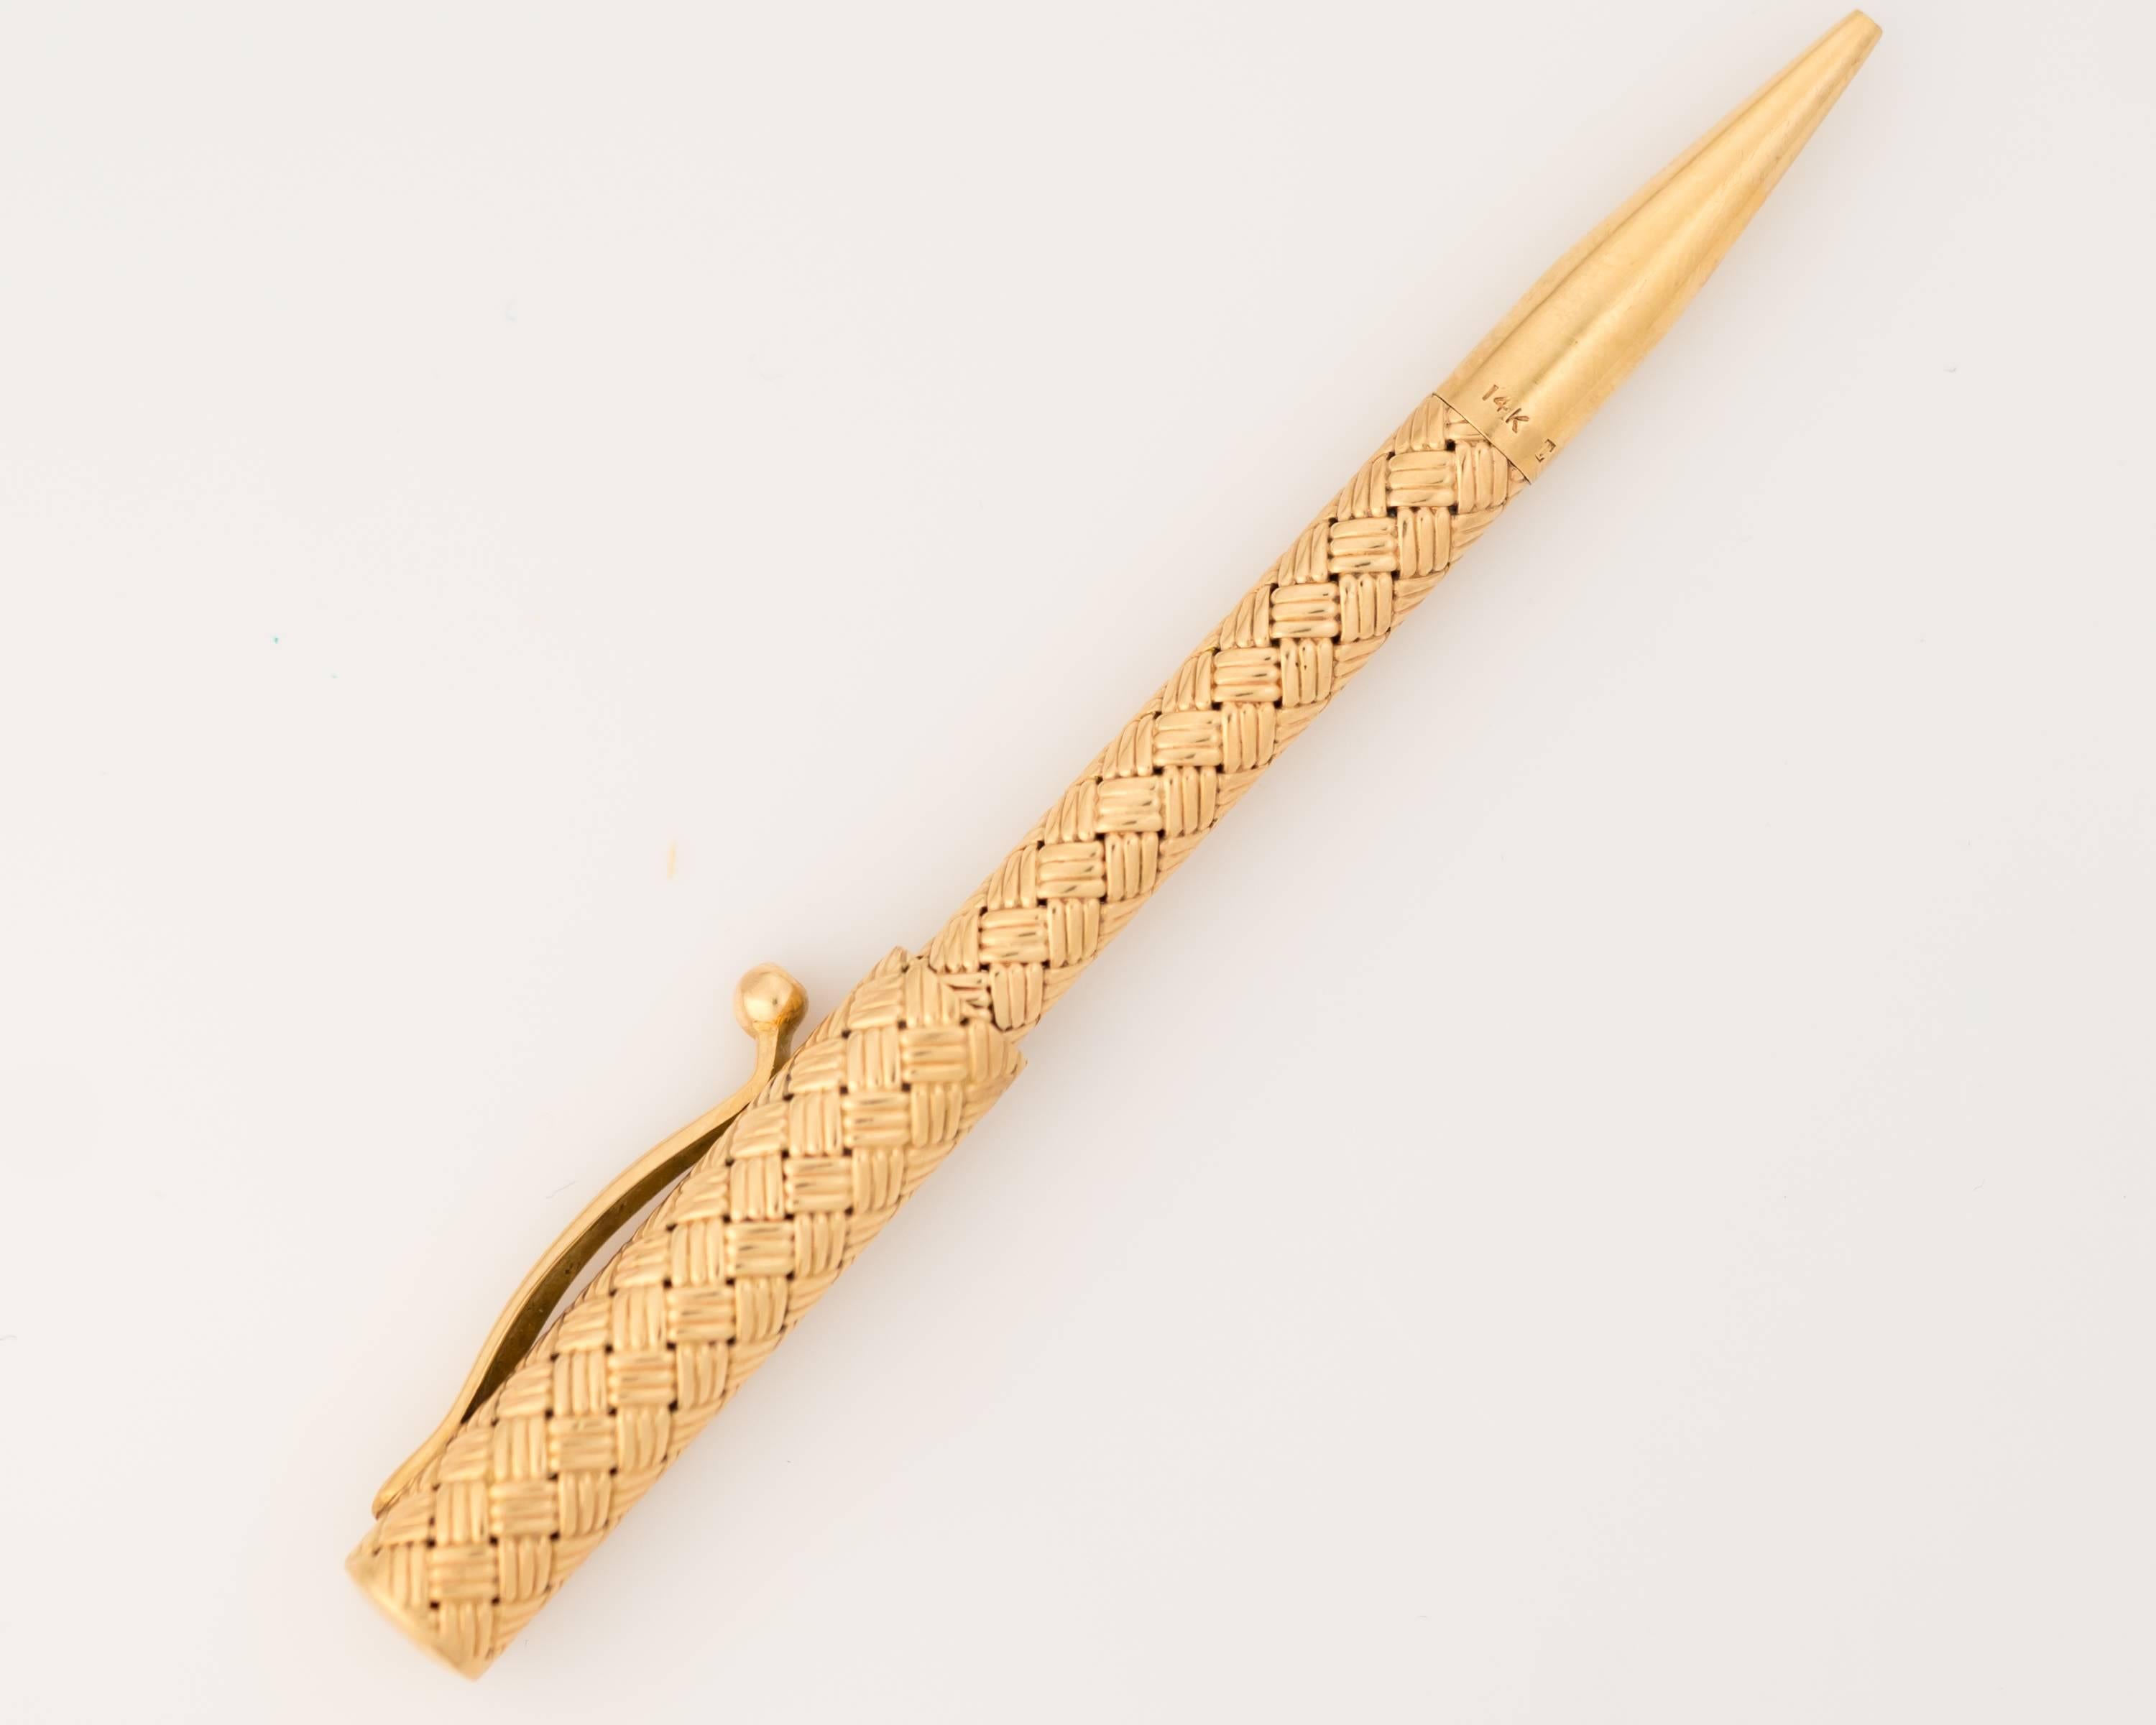 This 1930s Retro Tiffany and Co 14 Karat Yellow Gold Pen is simply gorgeous! It measures 3.5 inches long with the cap on and comes blank. It features a classic pattern. This is a lovely collectors piece. 


Item Details:
Metal: 14 karat yellow